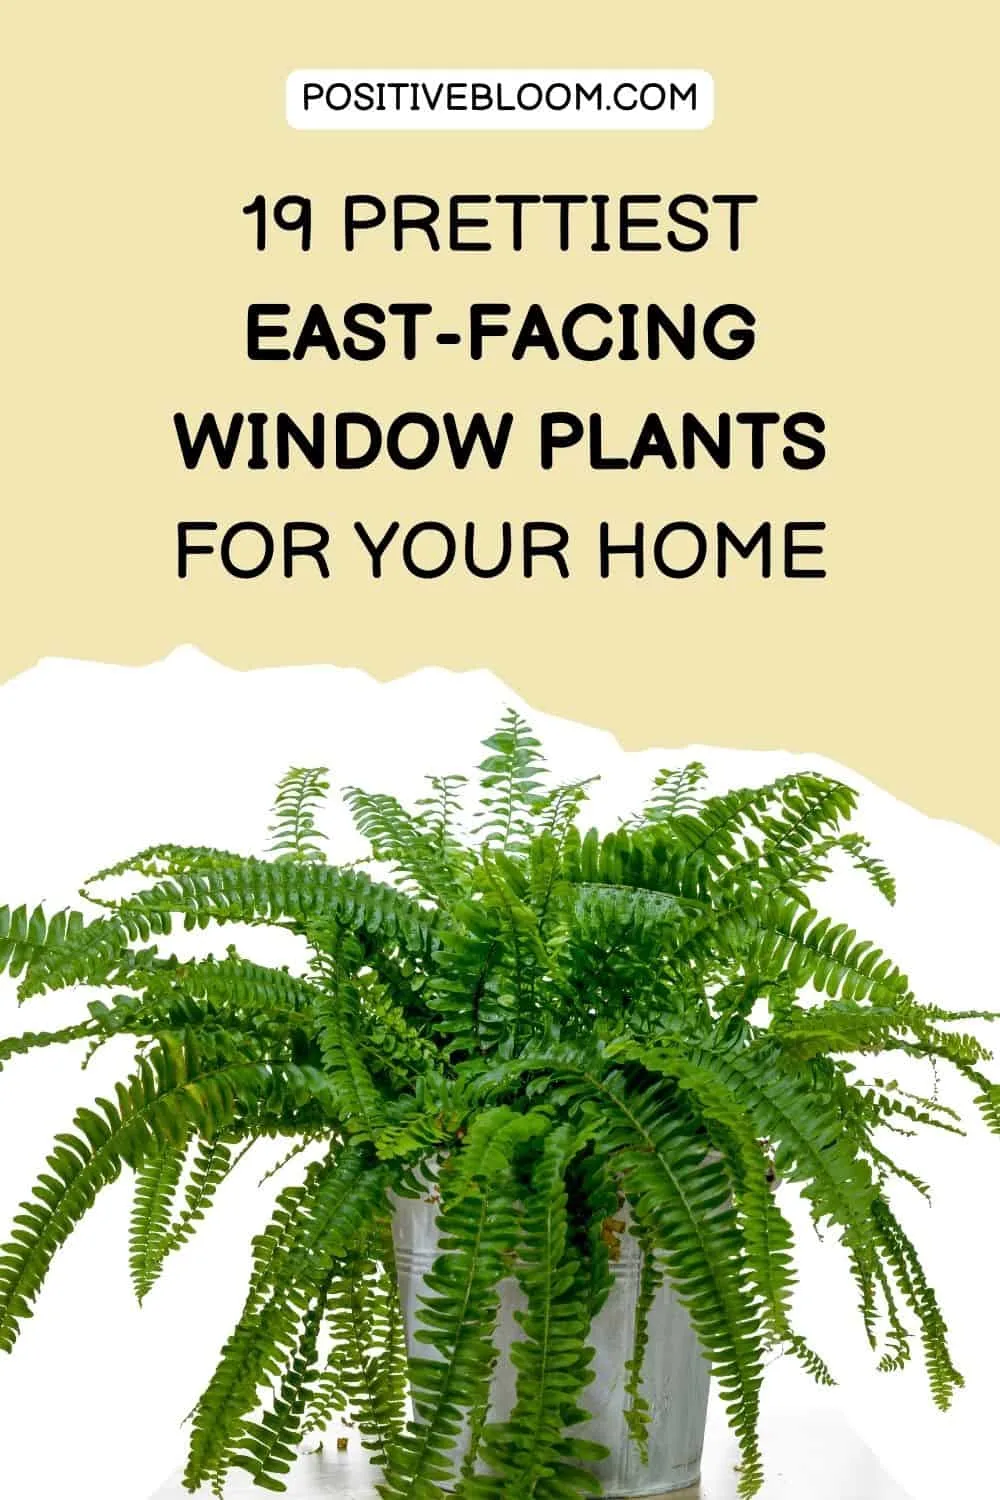 19 Prettiest East-Facing Window Plants For Your Home Pinterest